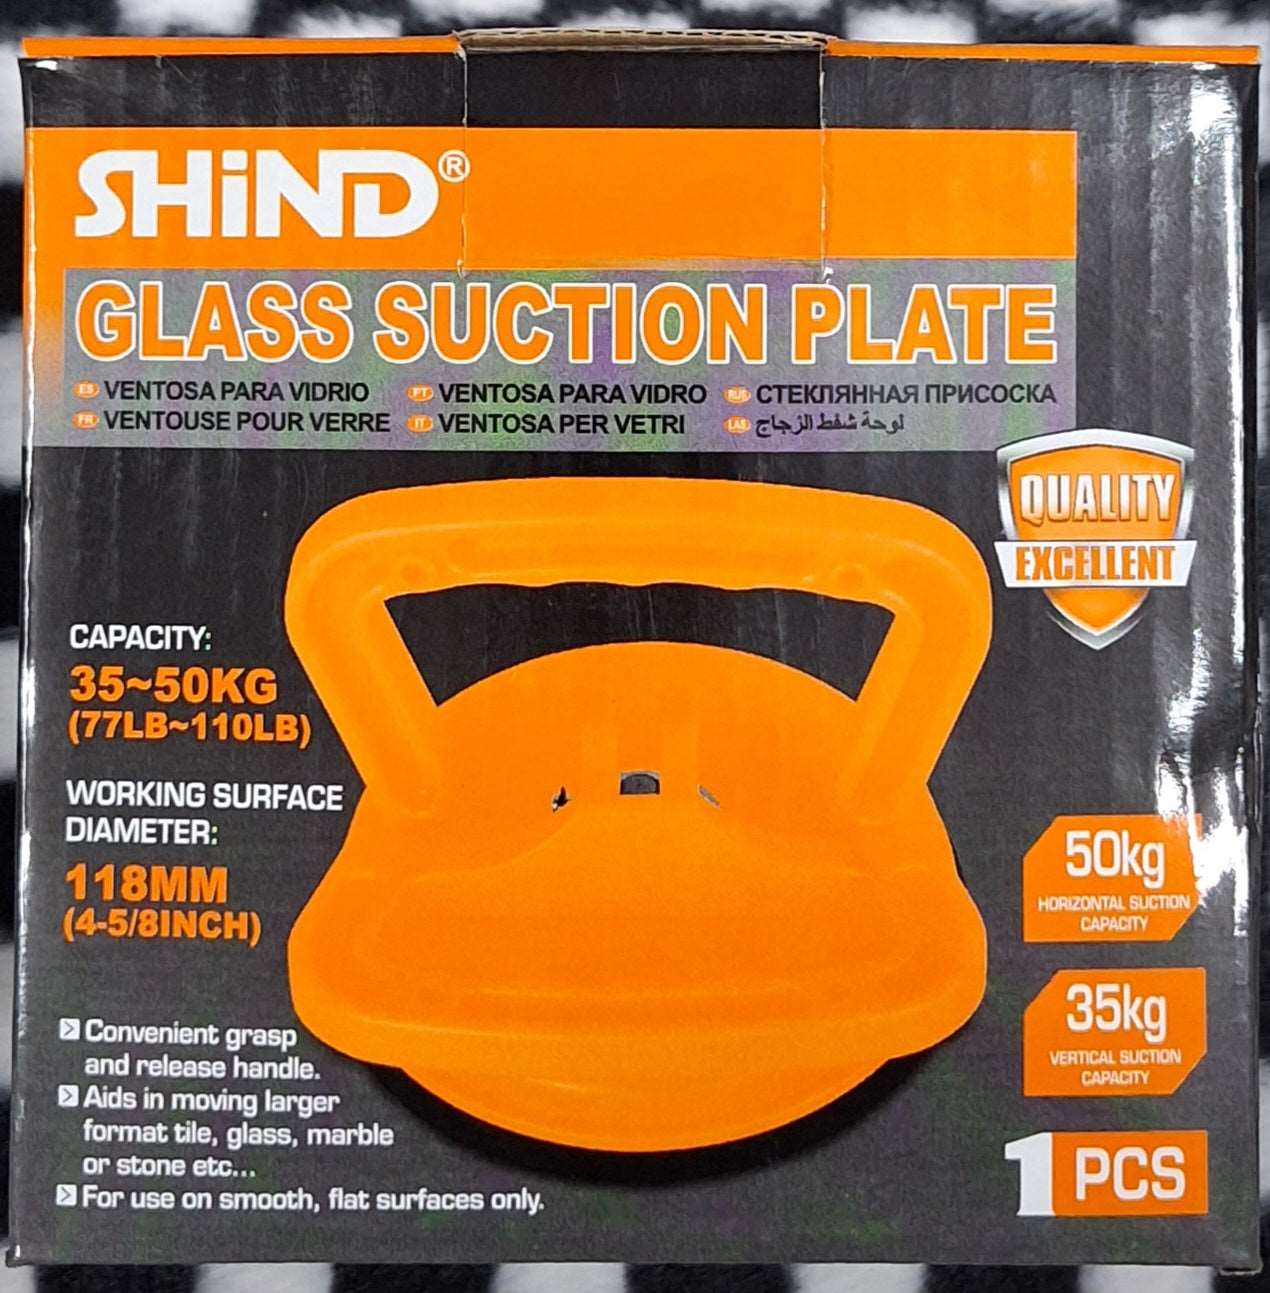 SHIND Claw Glass Suction Plate